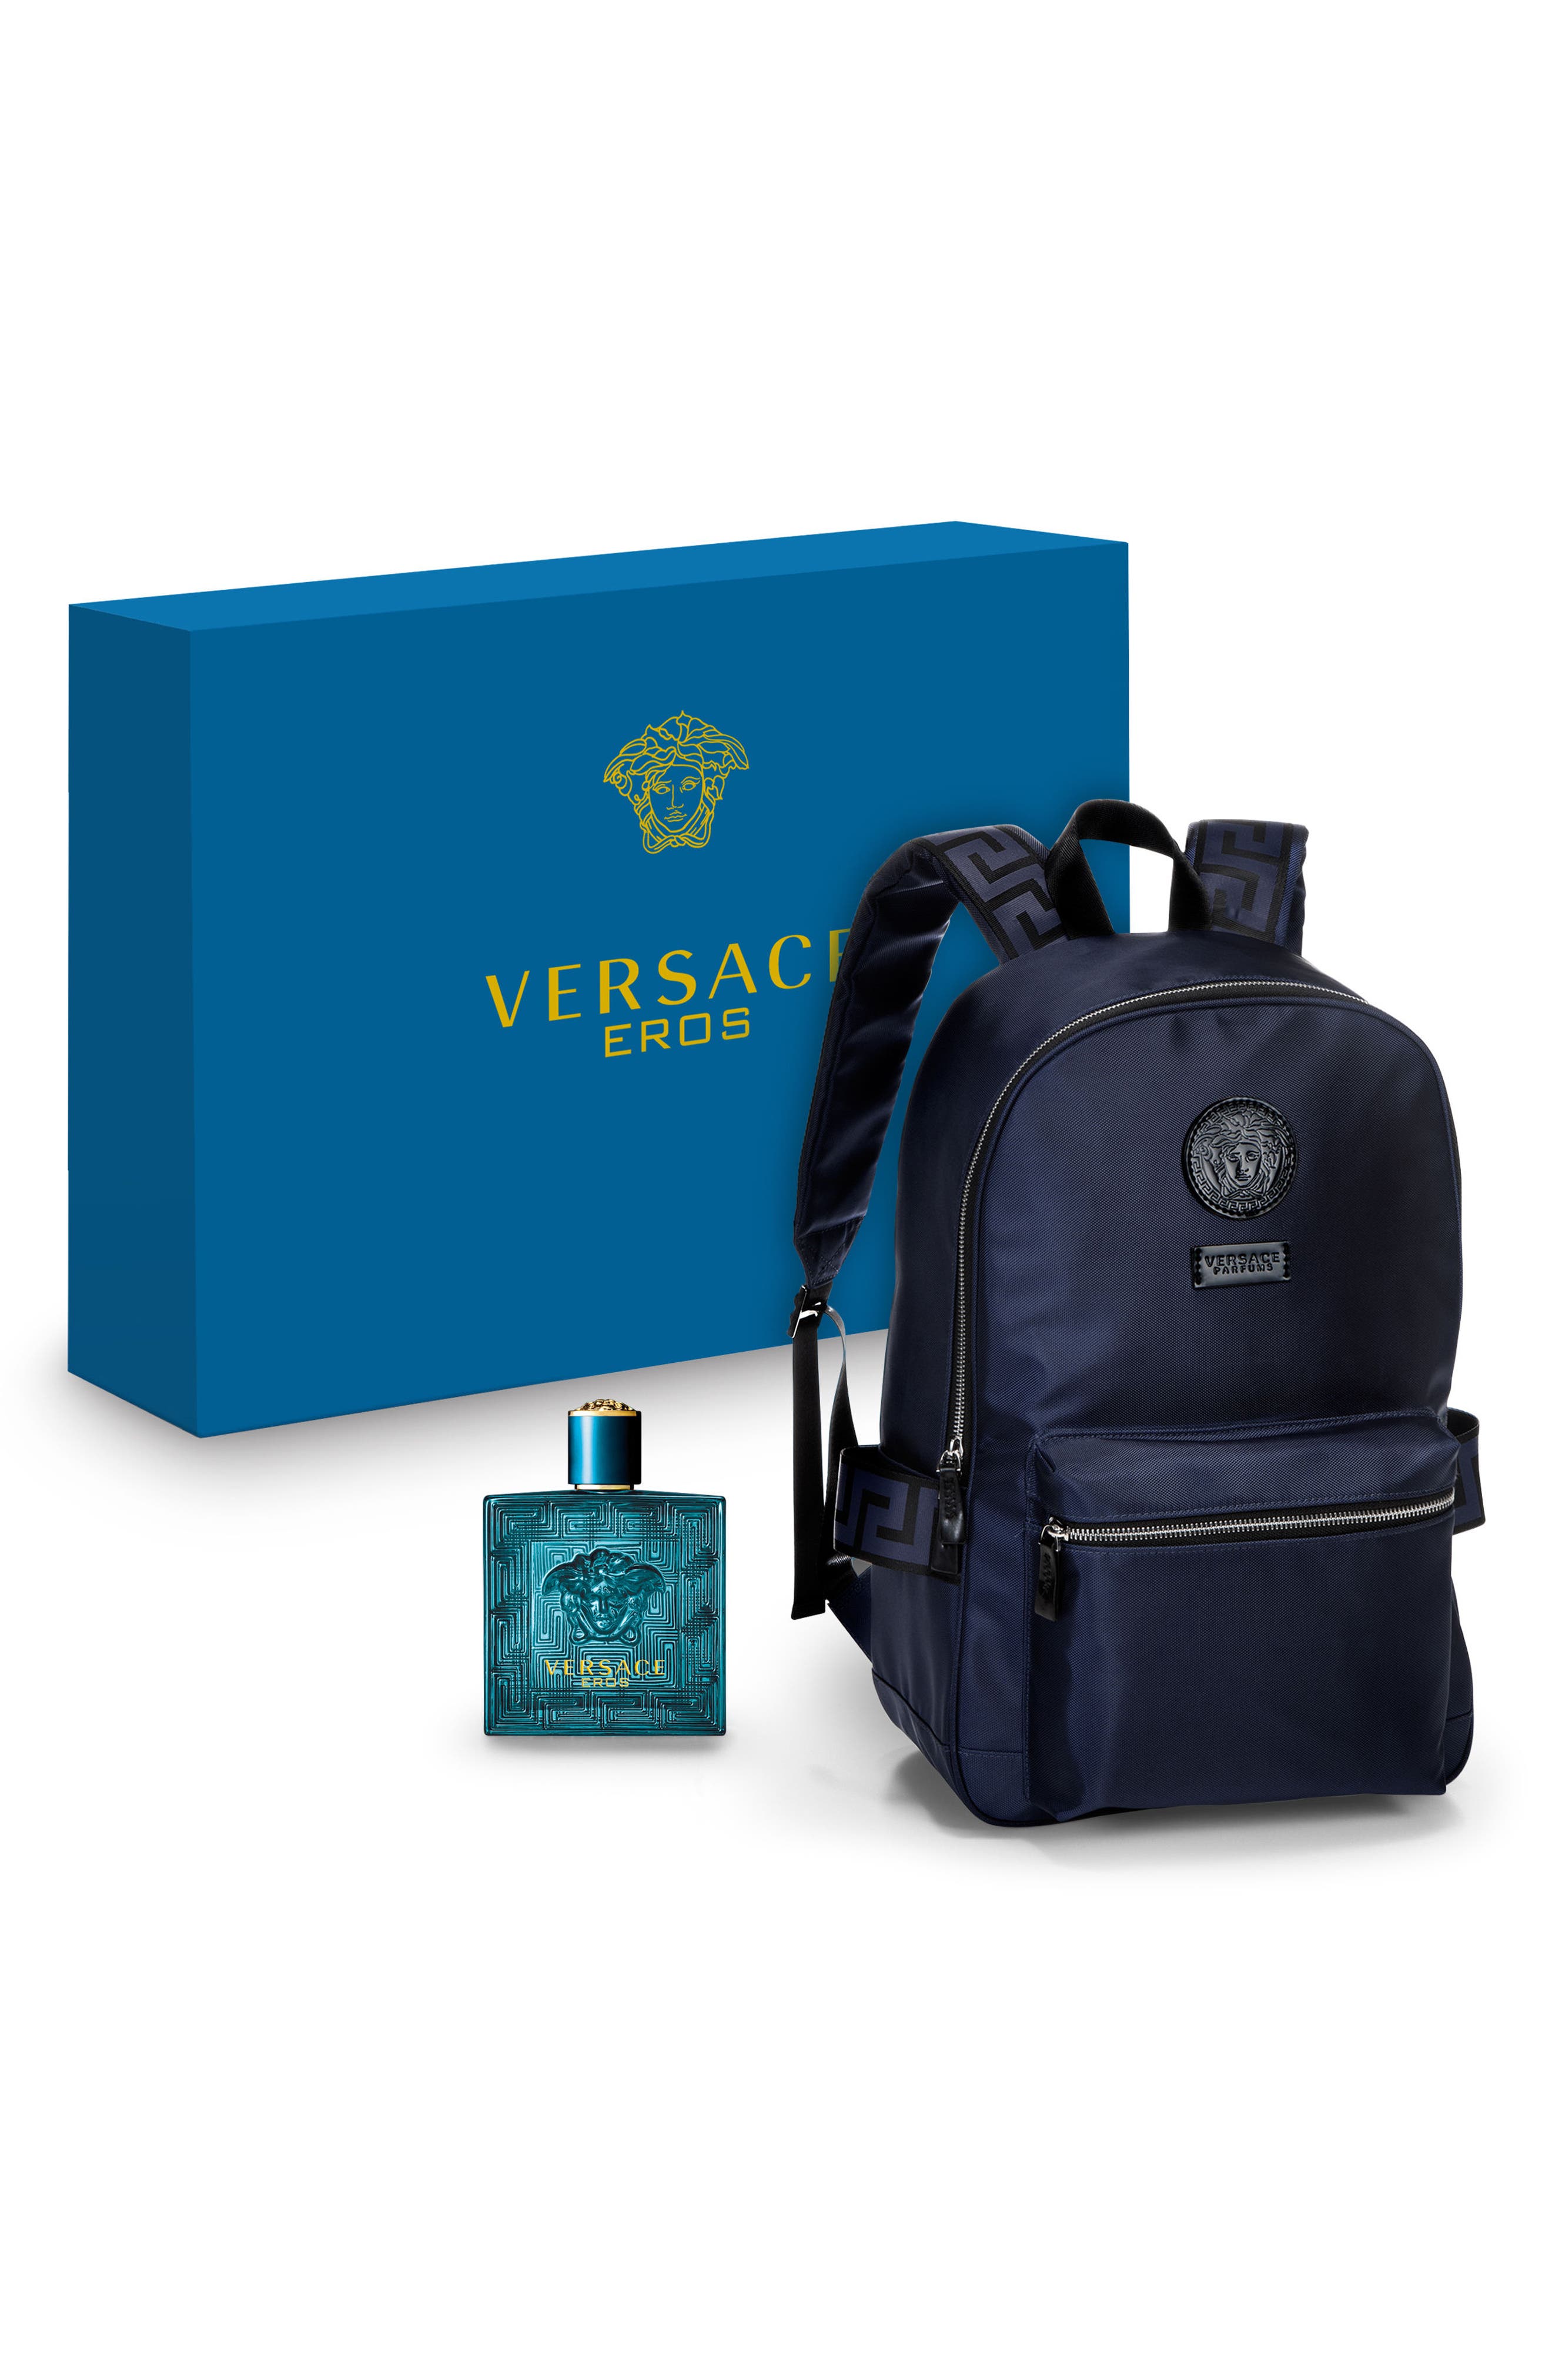 versace eros gift set with backpack